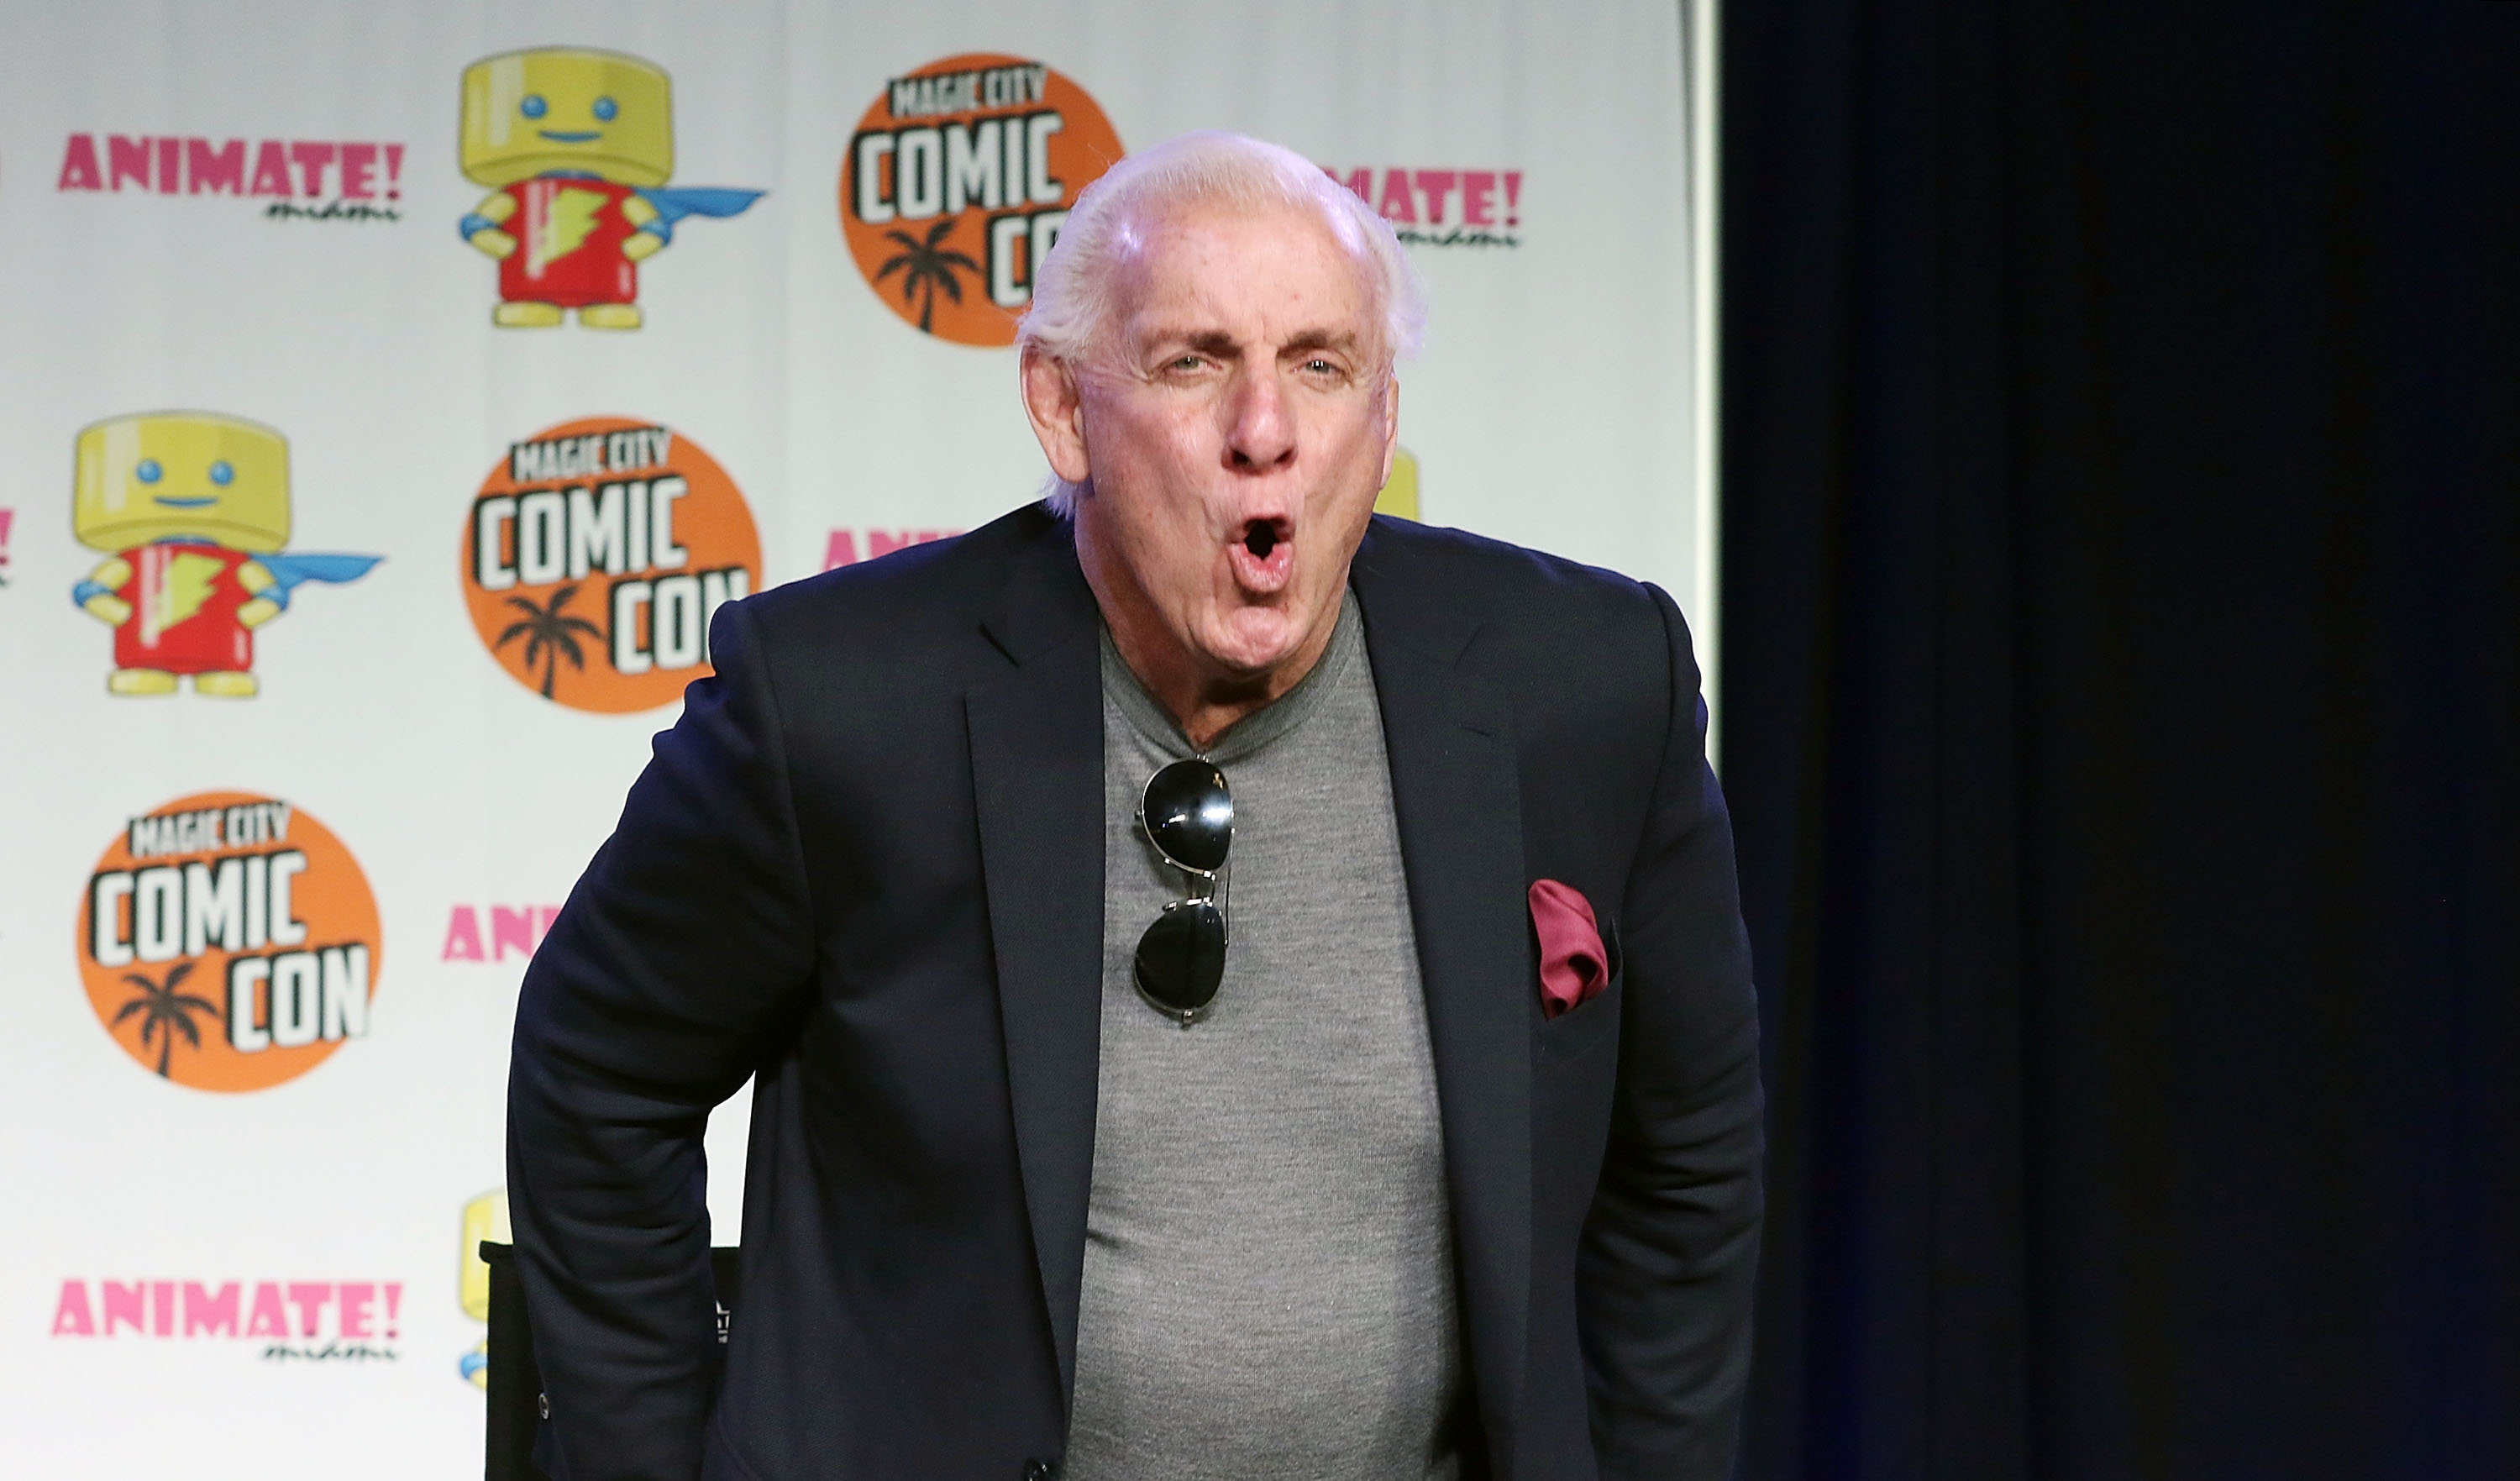 Ric Flair got very emotional when talking about his friend Steve McMichael.